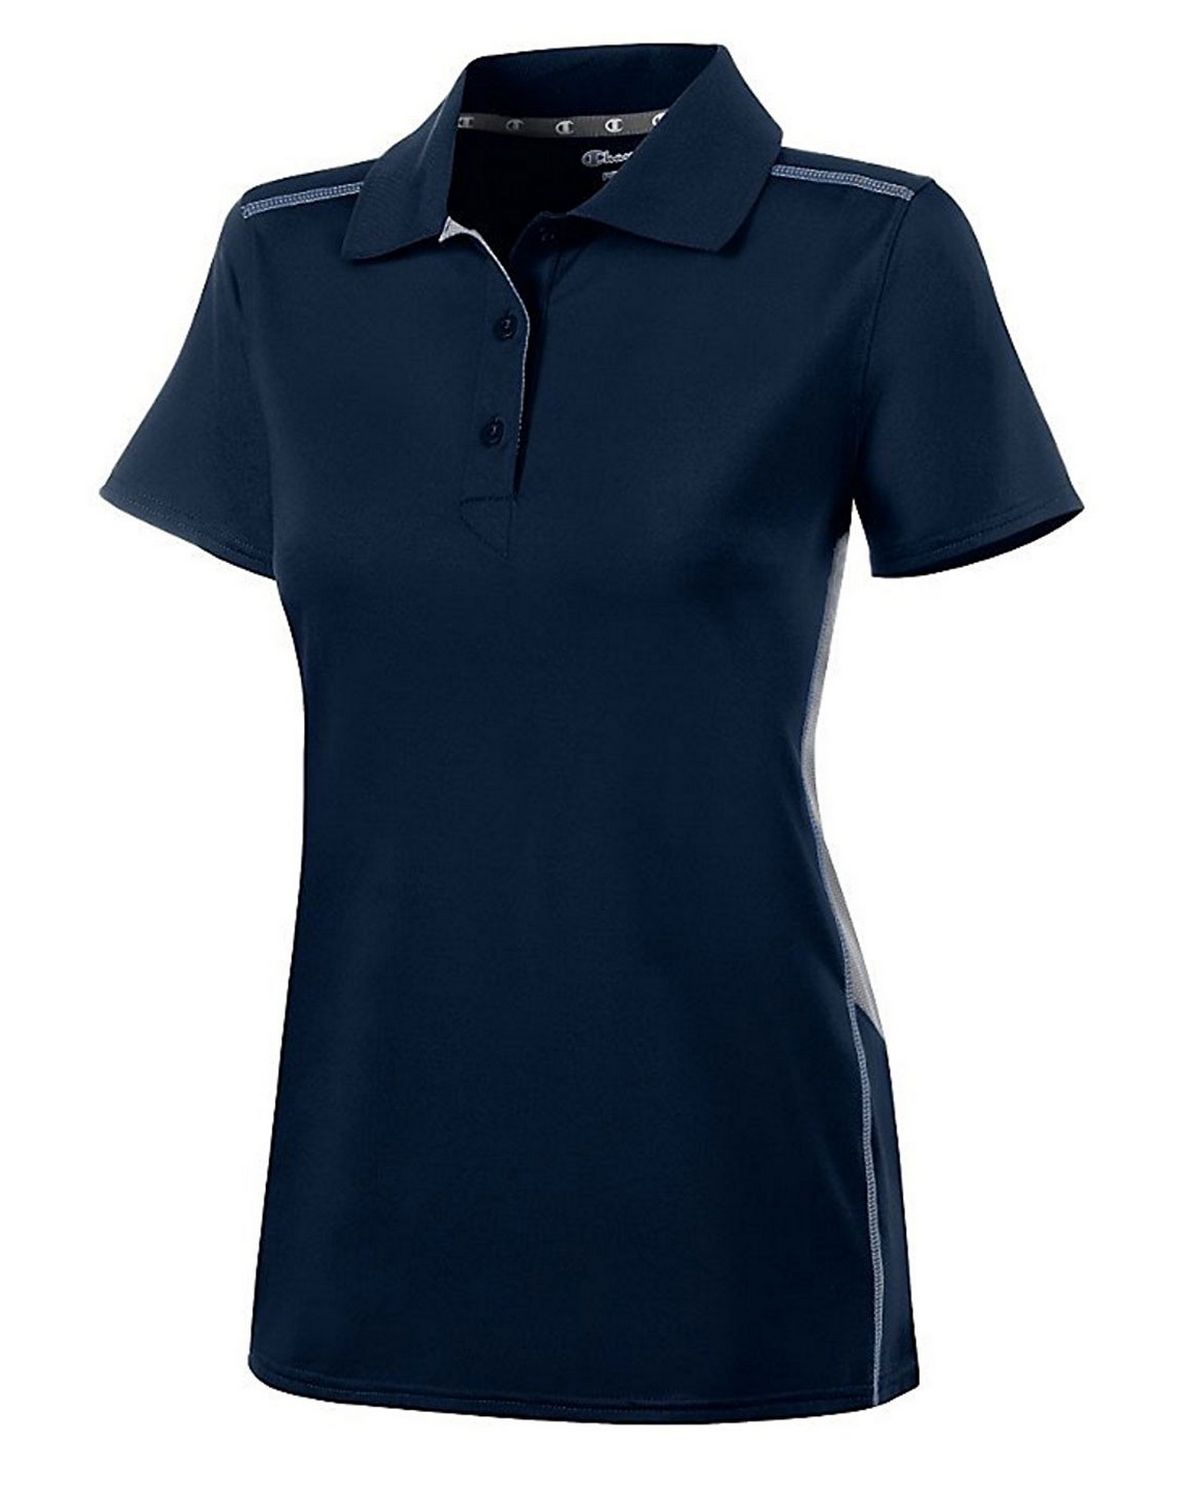 Champion H909 Womens Prime Double Dry Polo Shirt